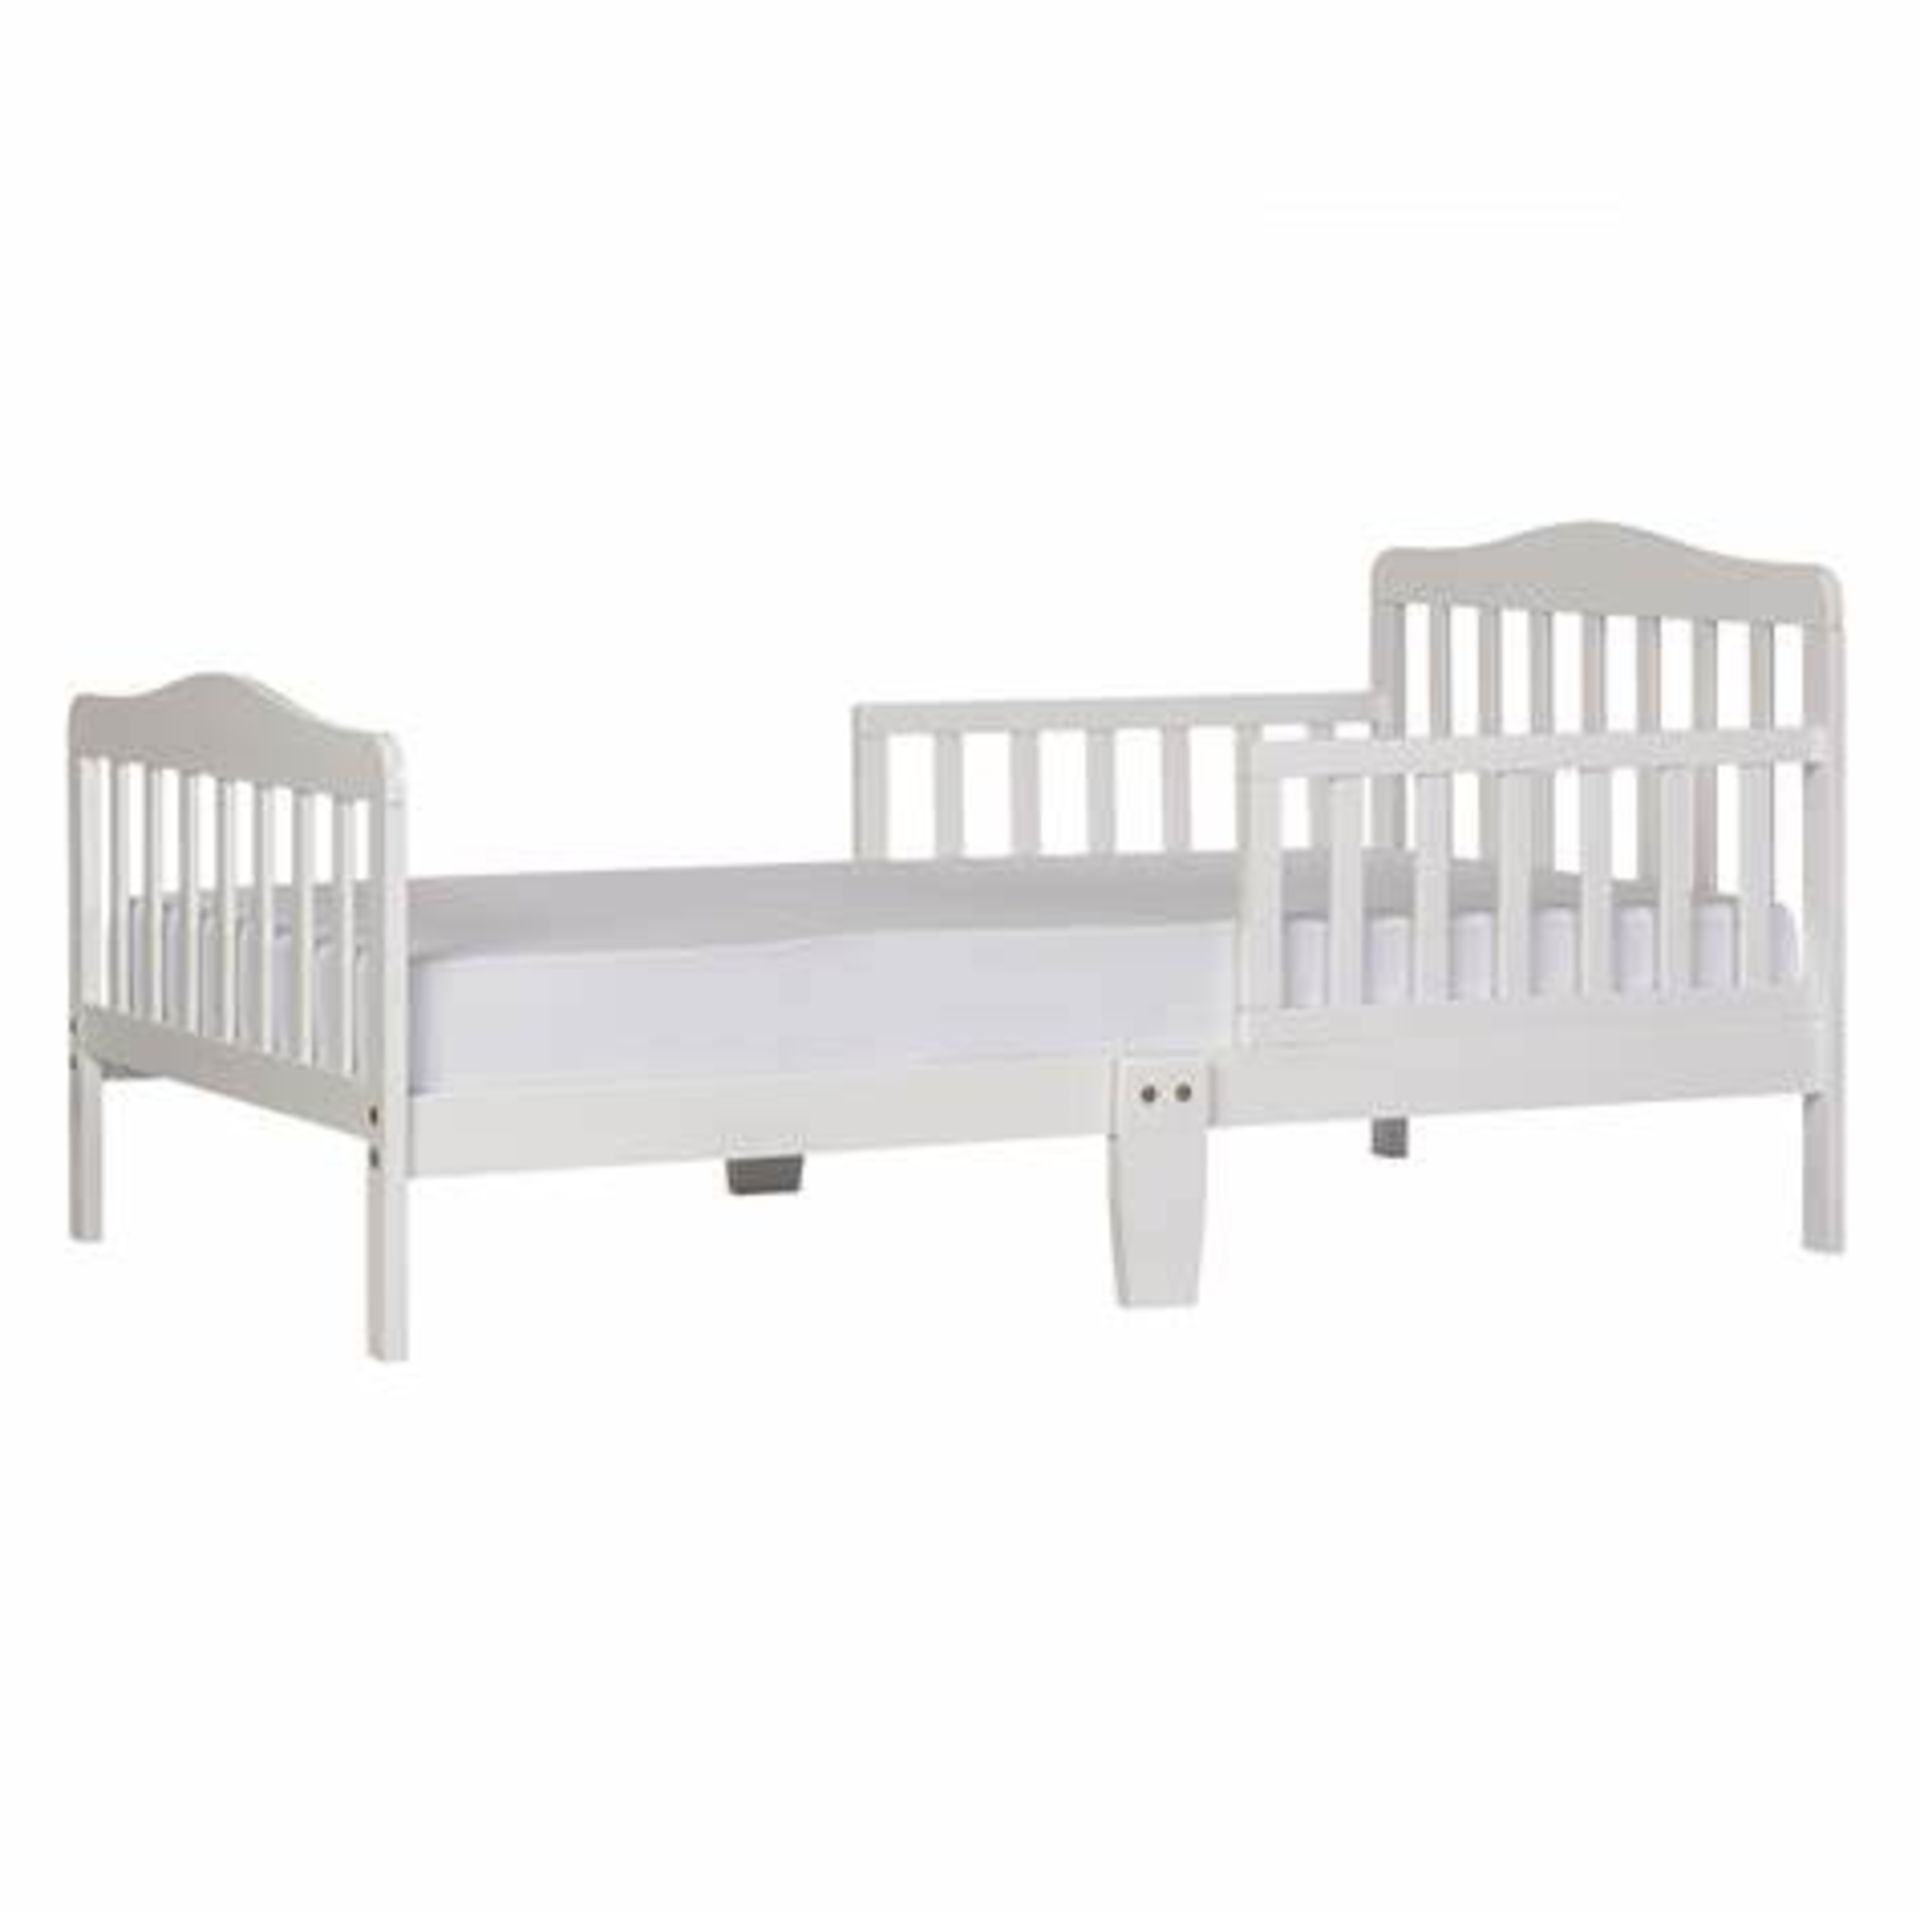 10 X Brand New Dream on Me Classic Toddler BedS. Product dimensionS - 144.8L x 71.1W x 76.2H CM - Bild 3 aus 4